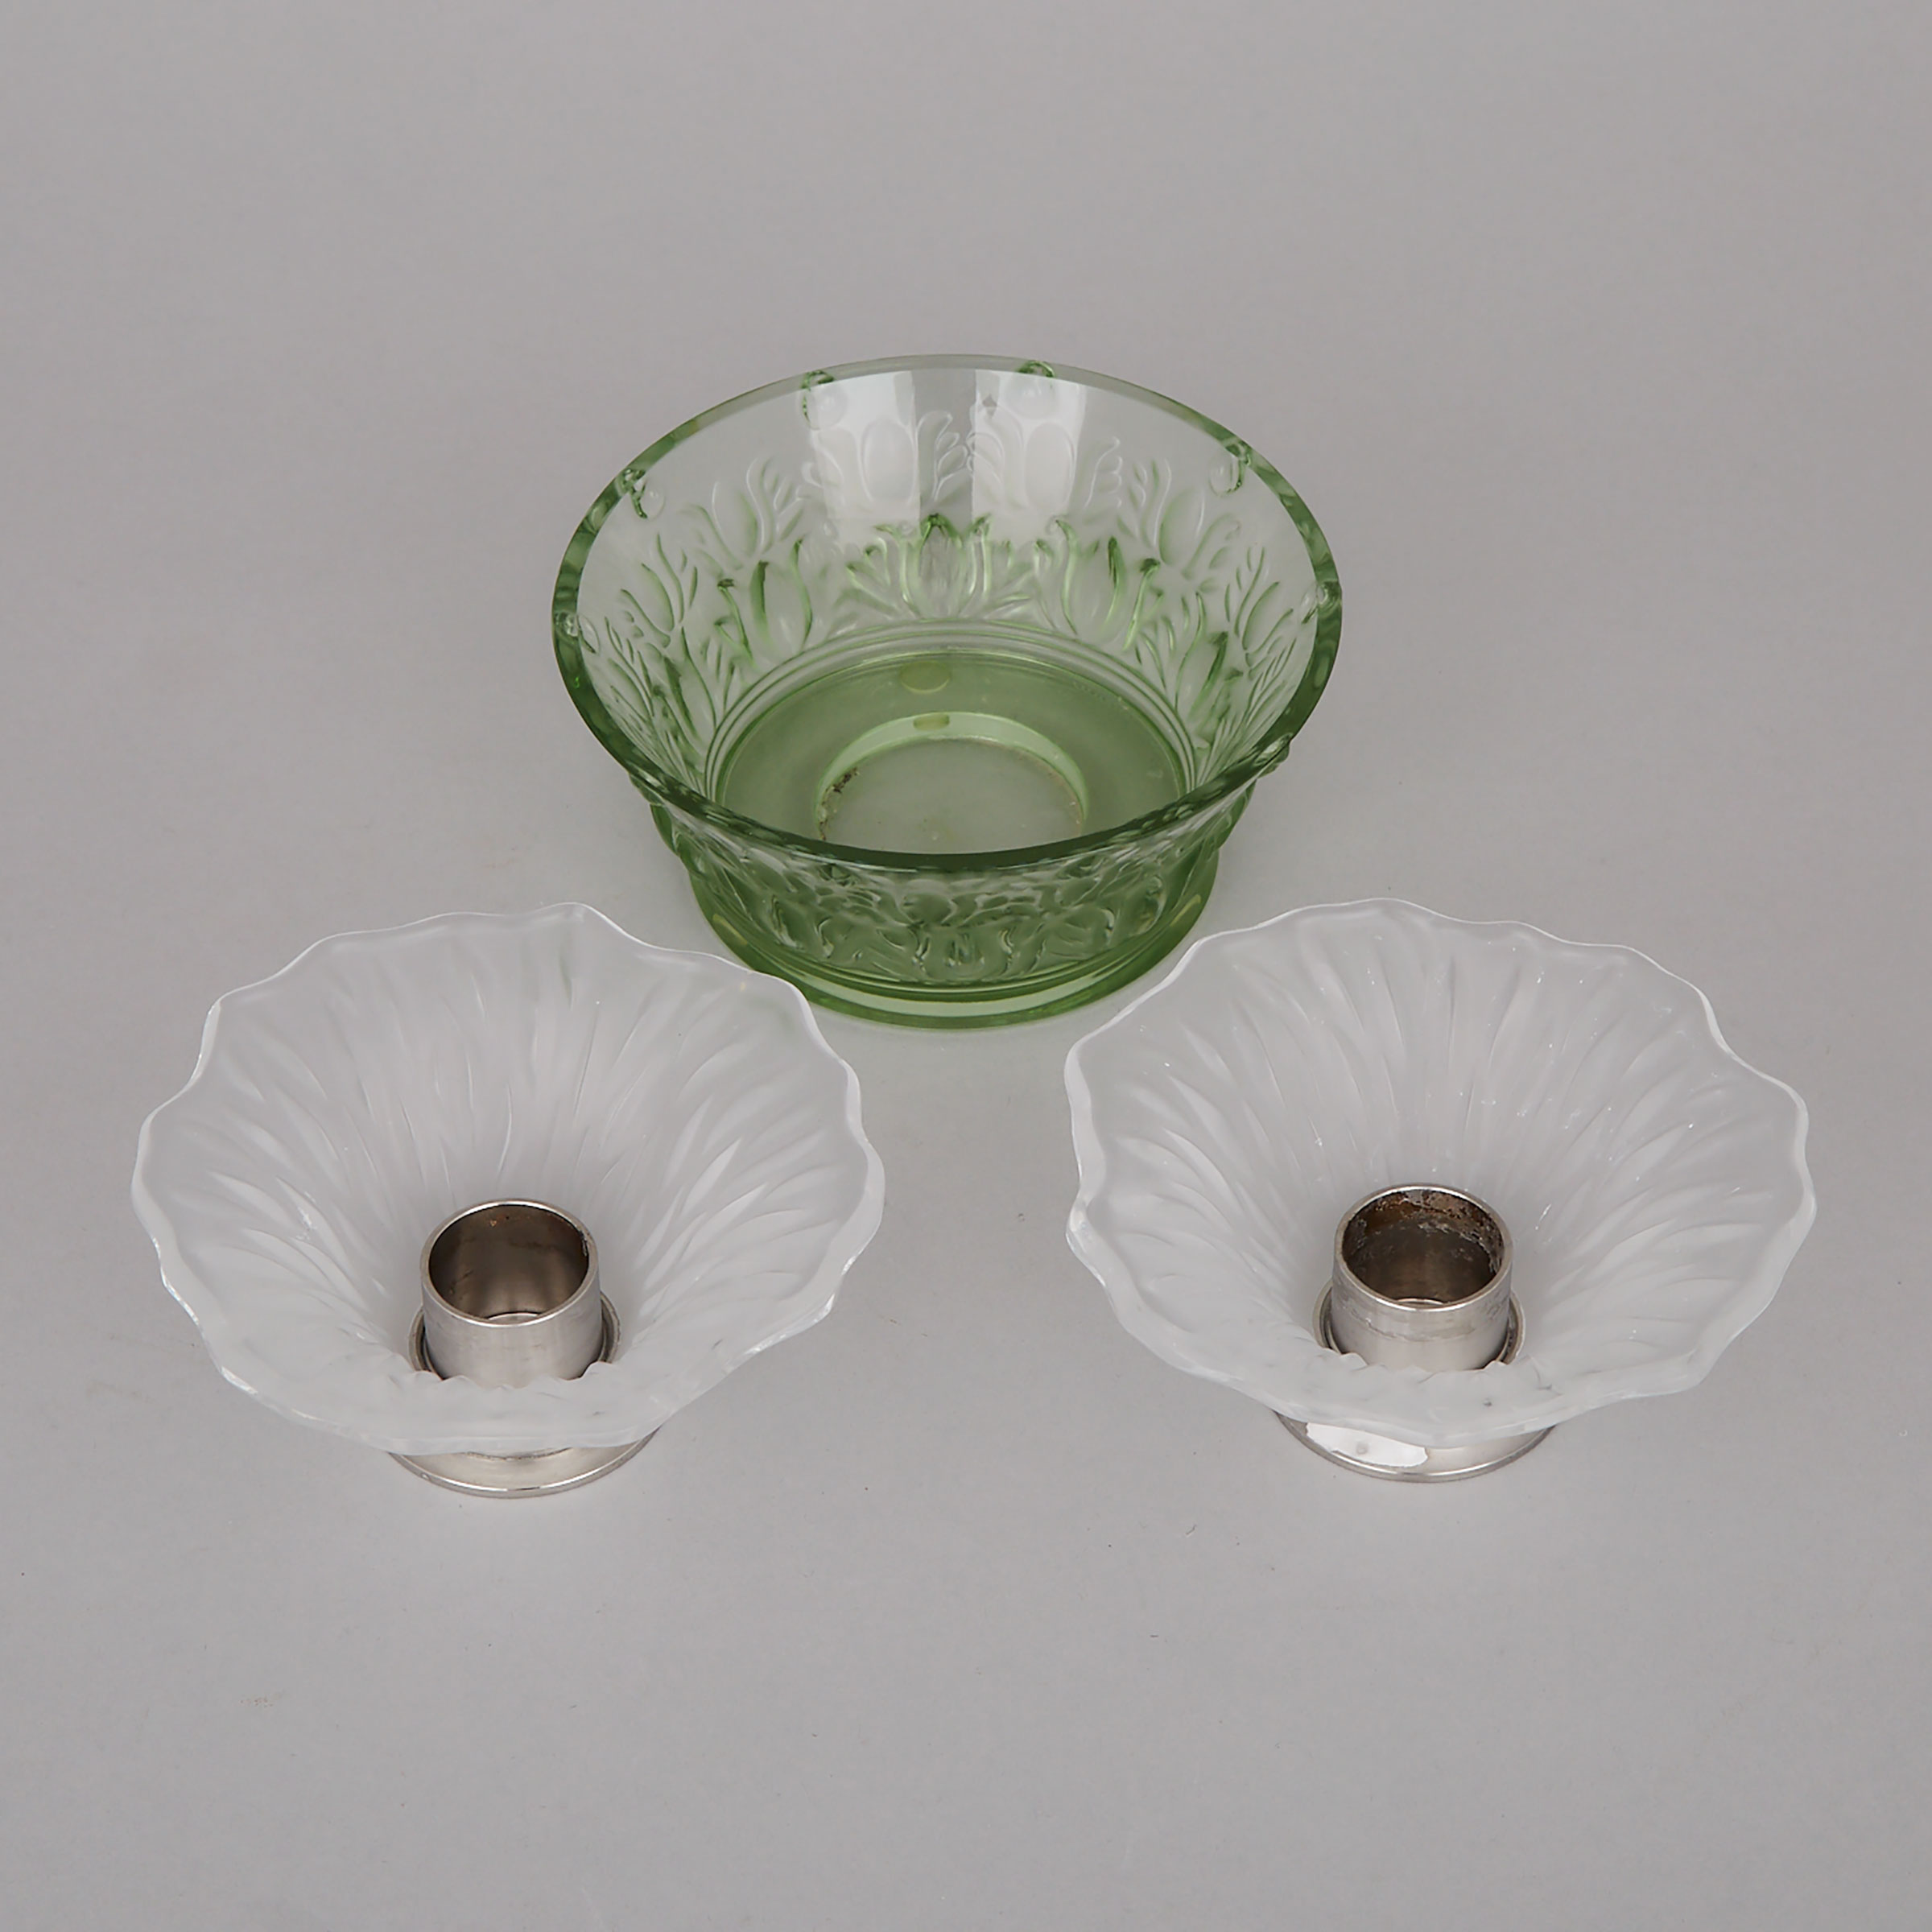 Three Lalique Moulded and Frosted Glass Candle Holders, 20th century